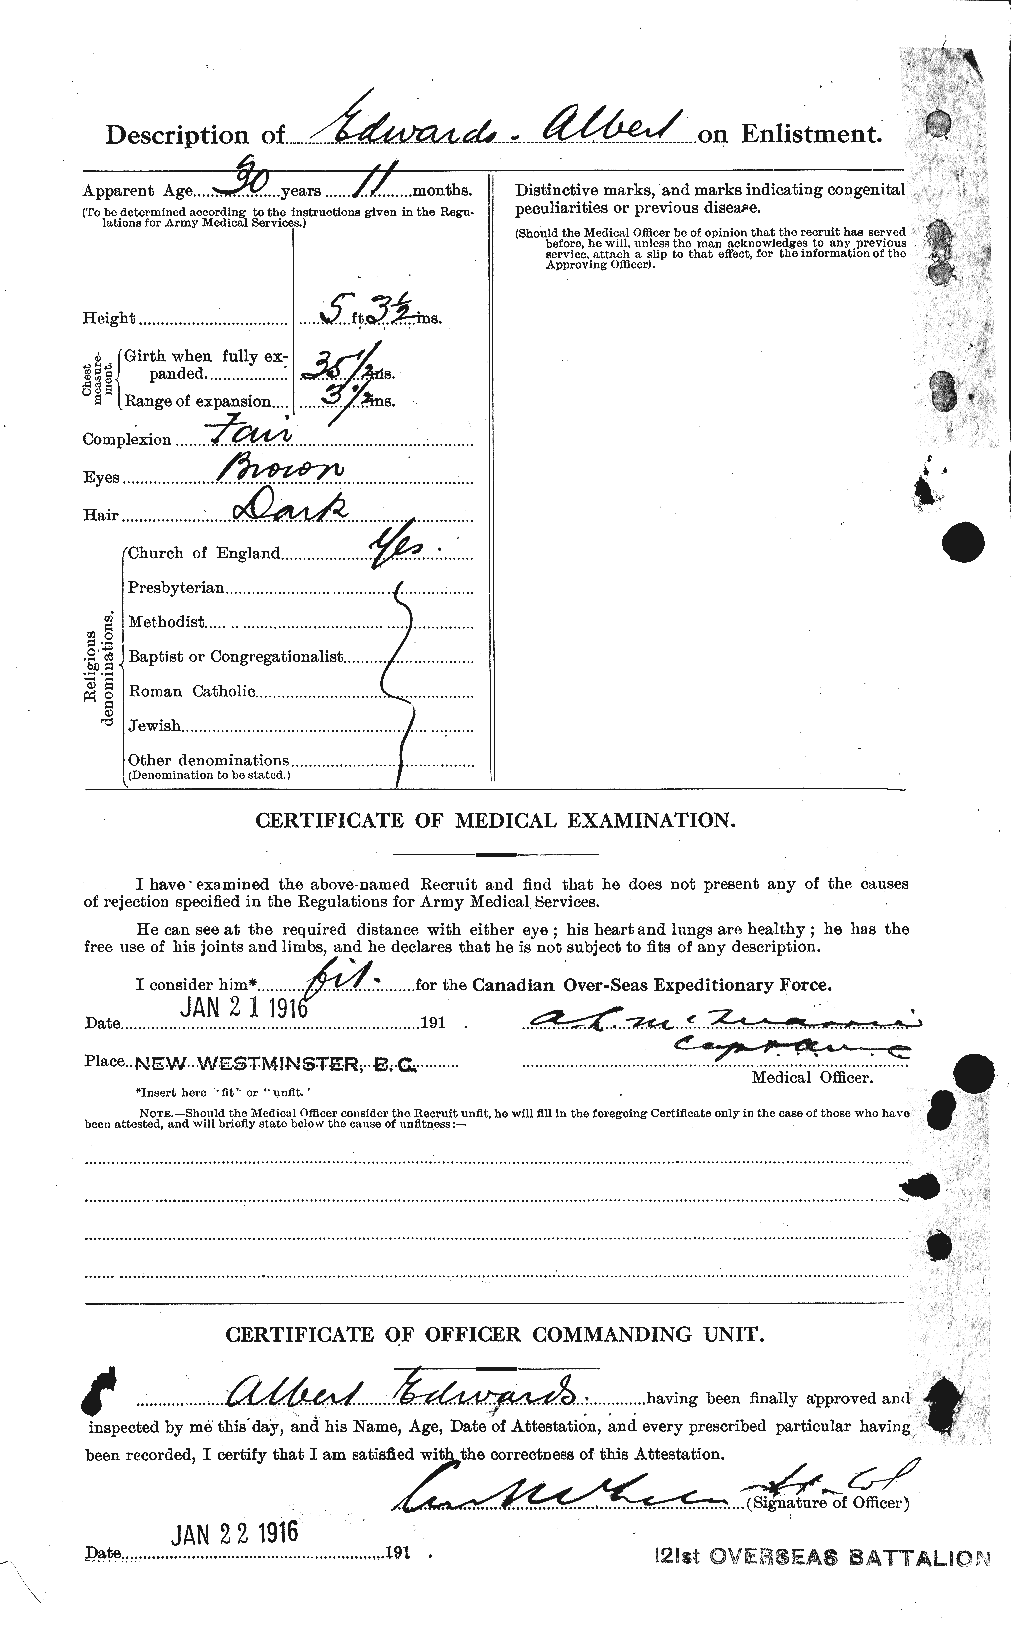 Personnel Records of the First World War - CEF 056778b